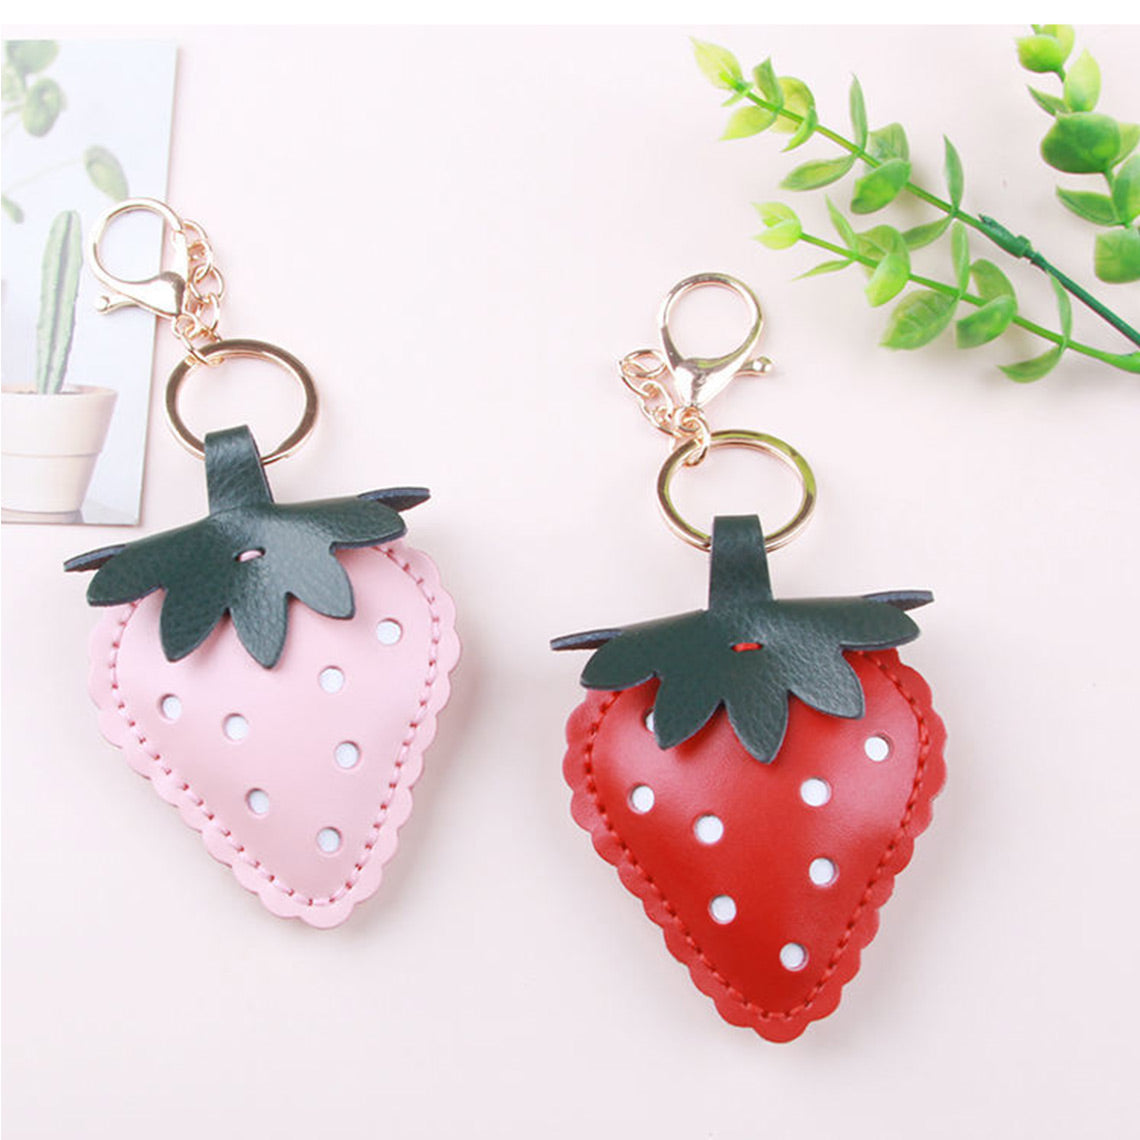 Strawberry Keychain in Pink and Red - Strawberry Bag Charm | POPSEWING™